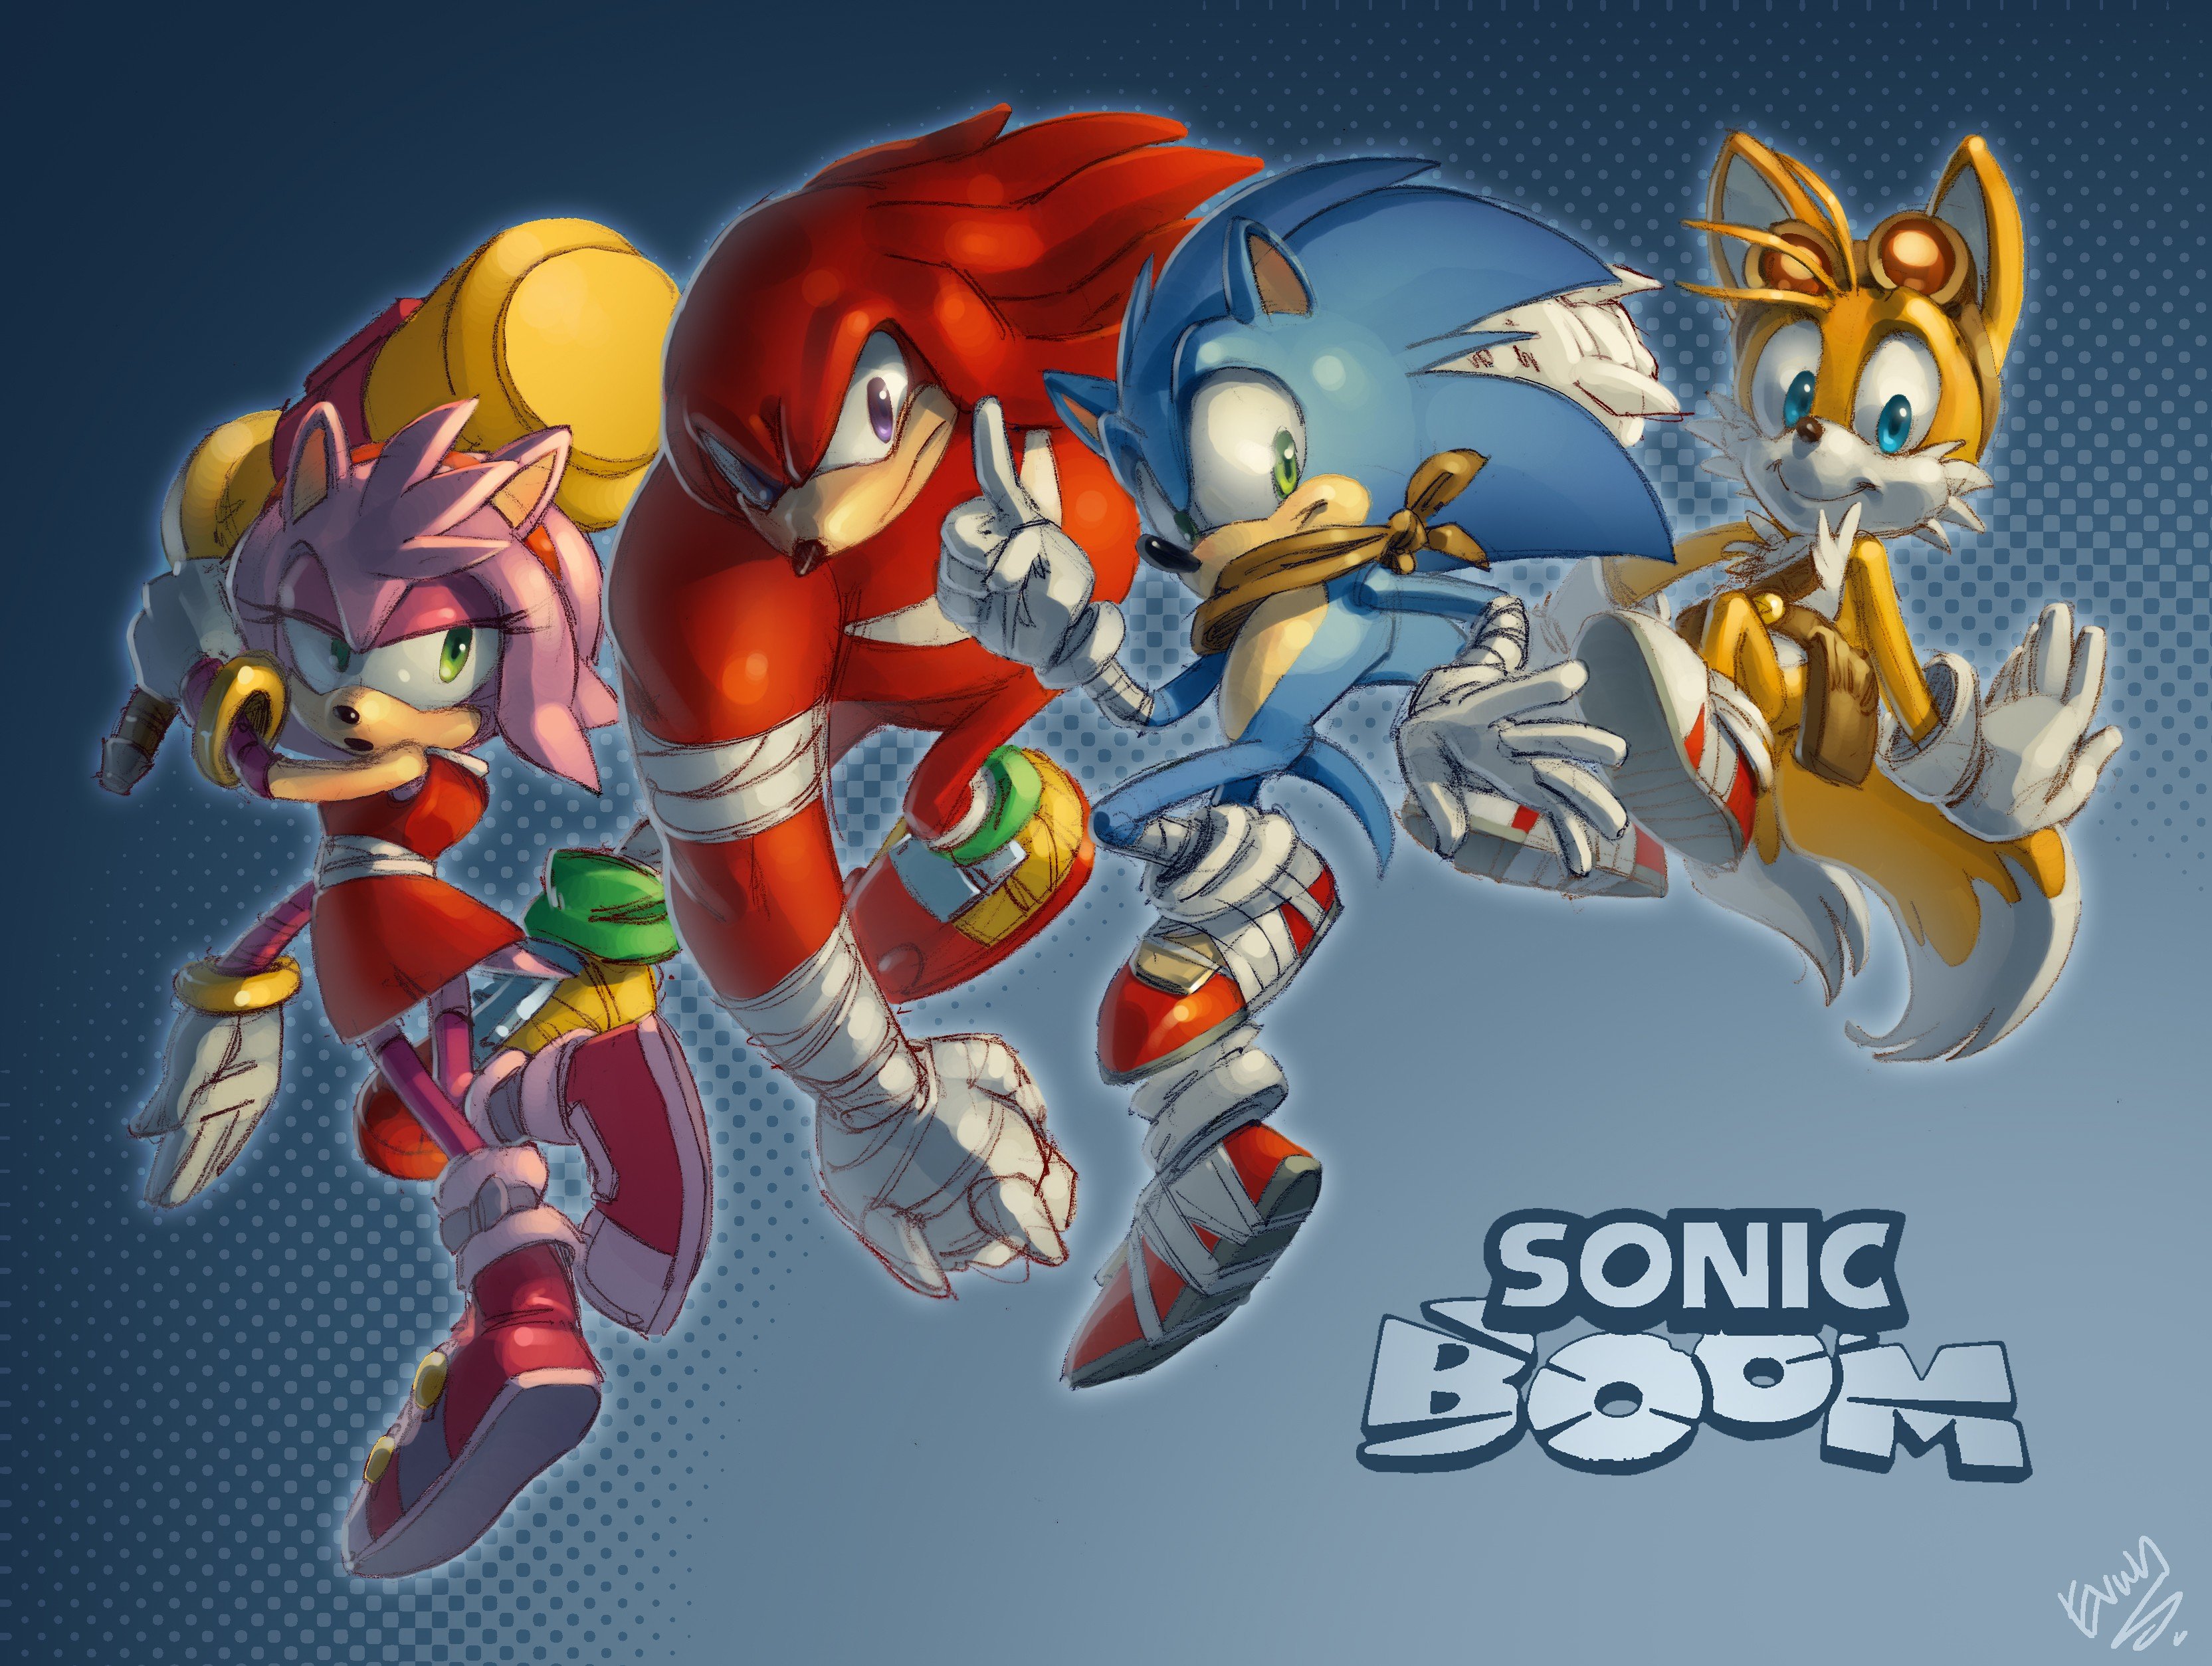 Tails (character), Sonic Boom, Sonic, Sonic the Hedgehog, Knuckles Wallpape...